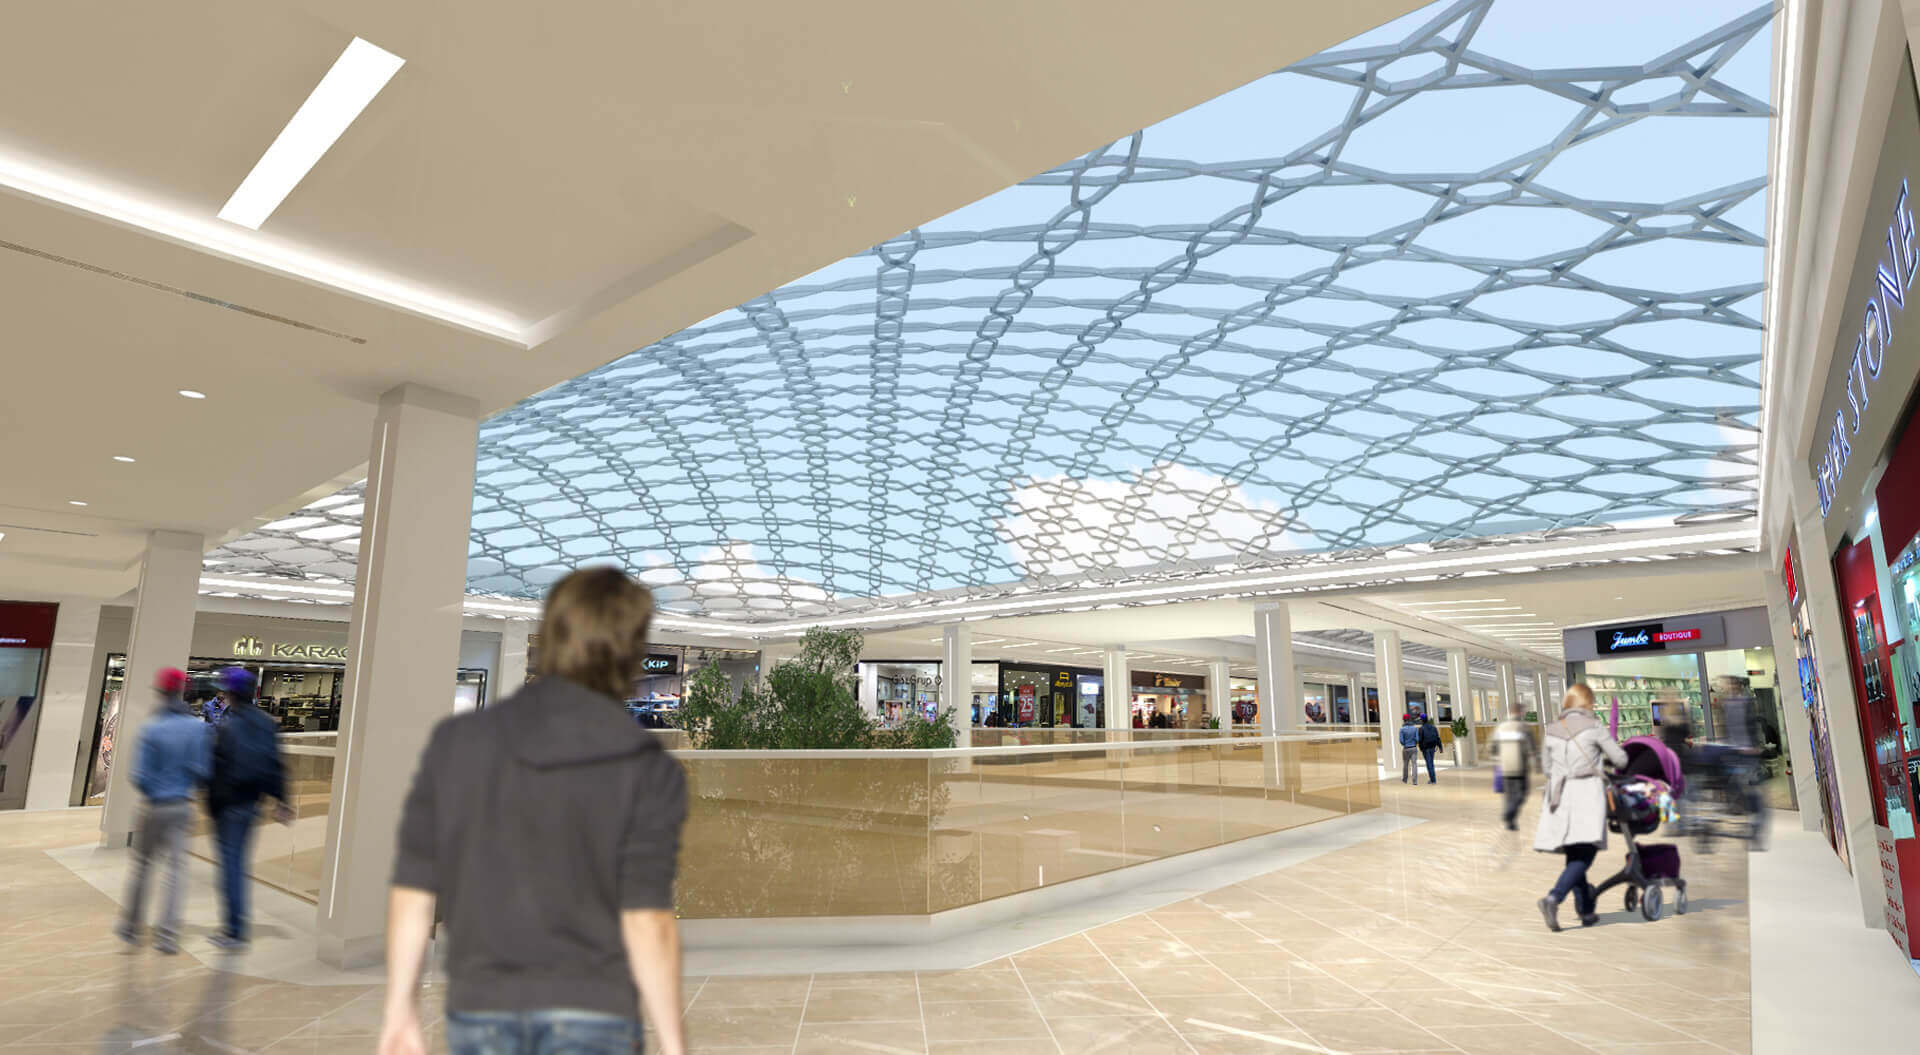 Icerenkoy shopping mall Istanbul interior design food court and geodesic glazed roof design